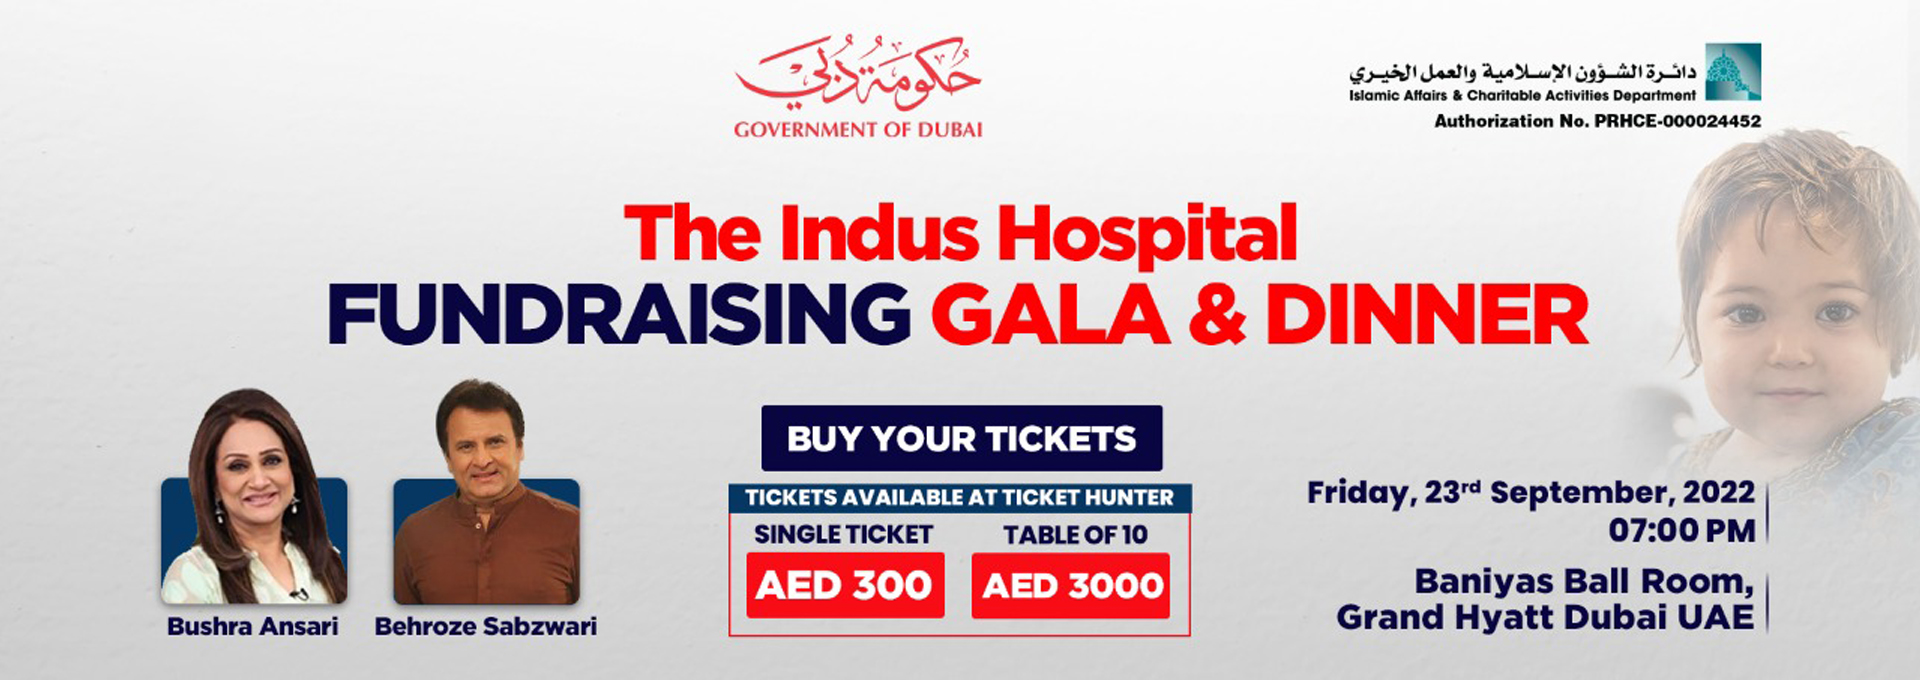 Fundraising Gala and Dinner